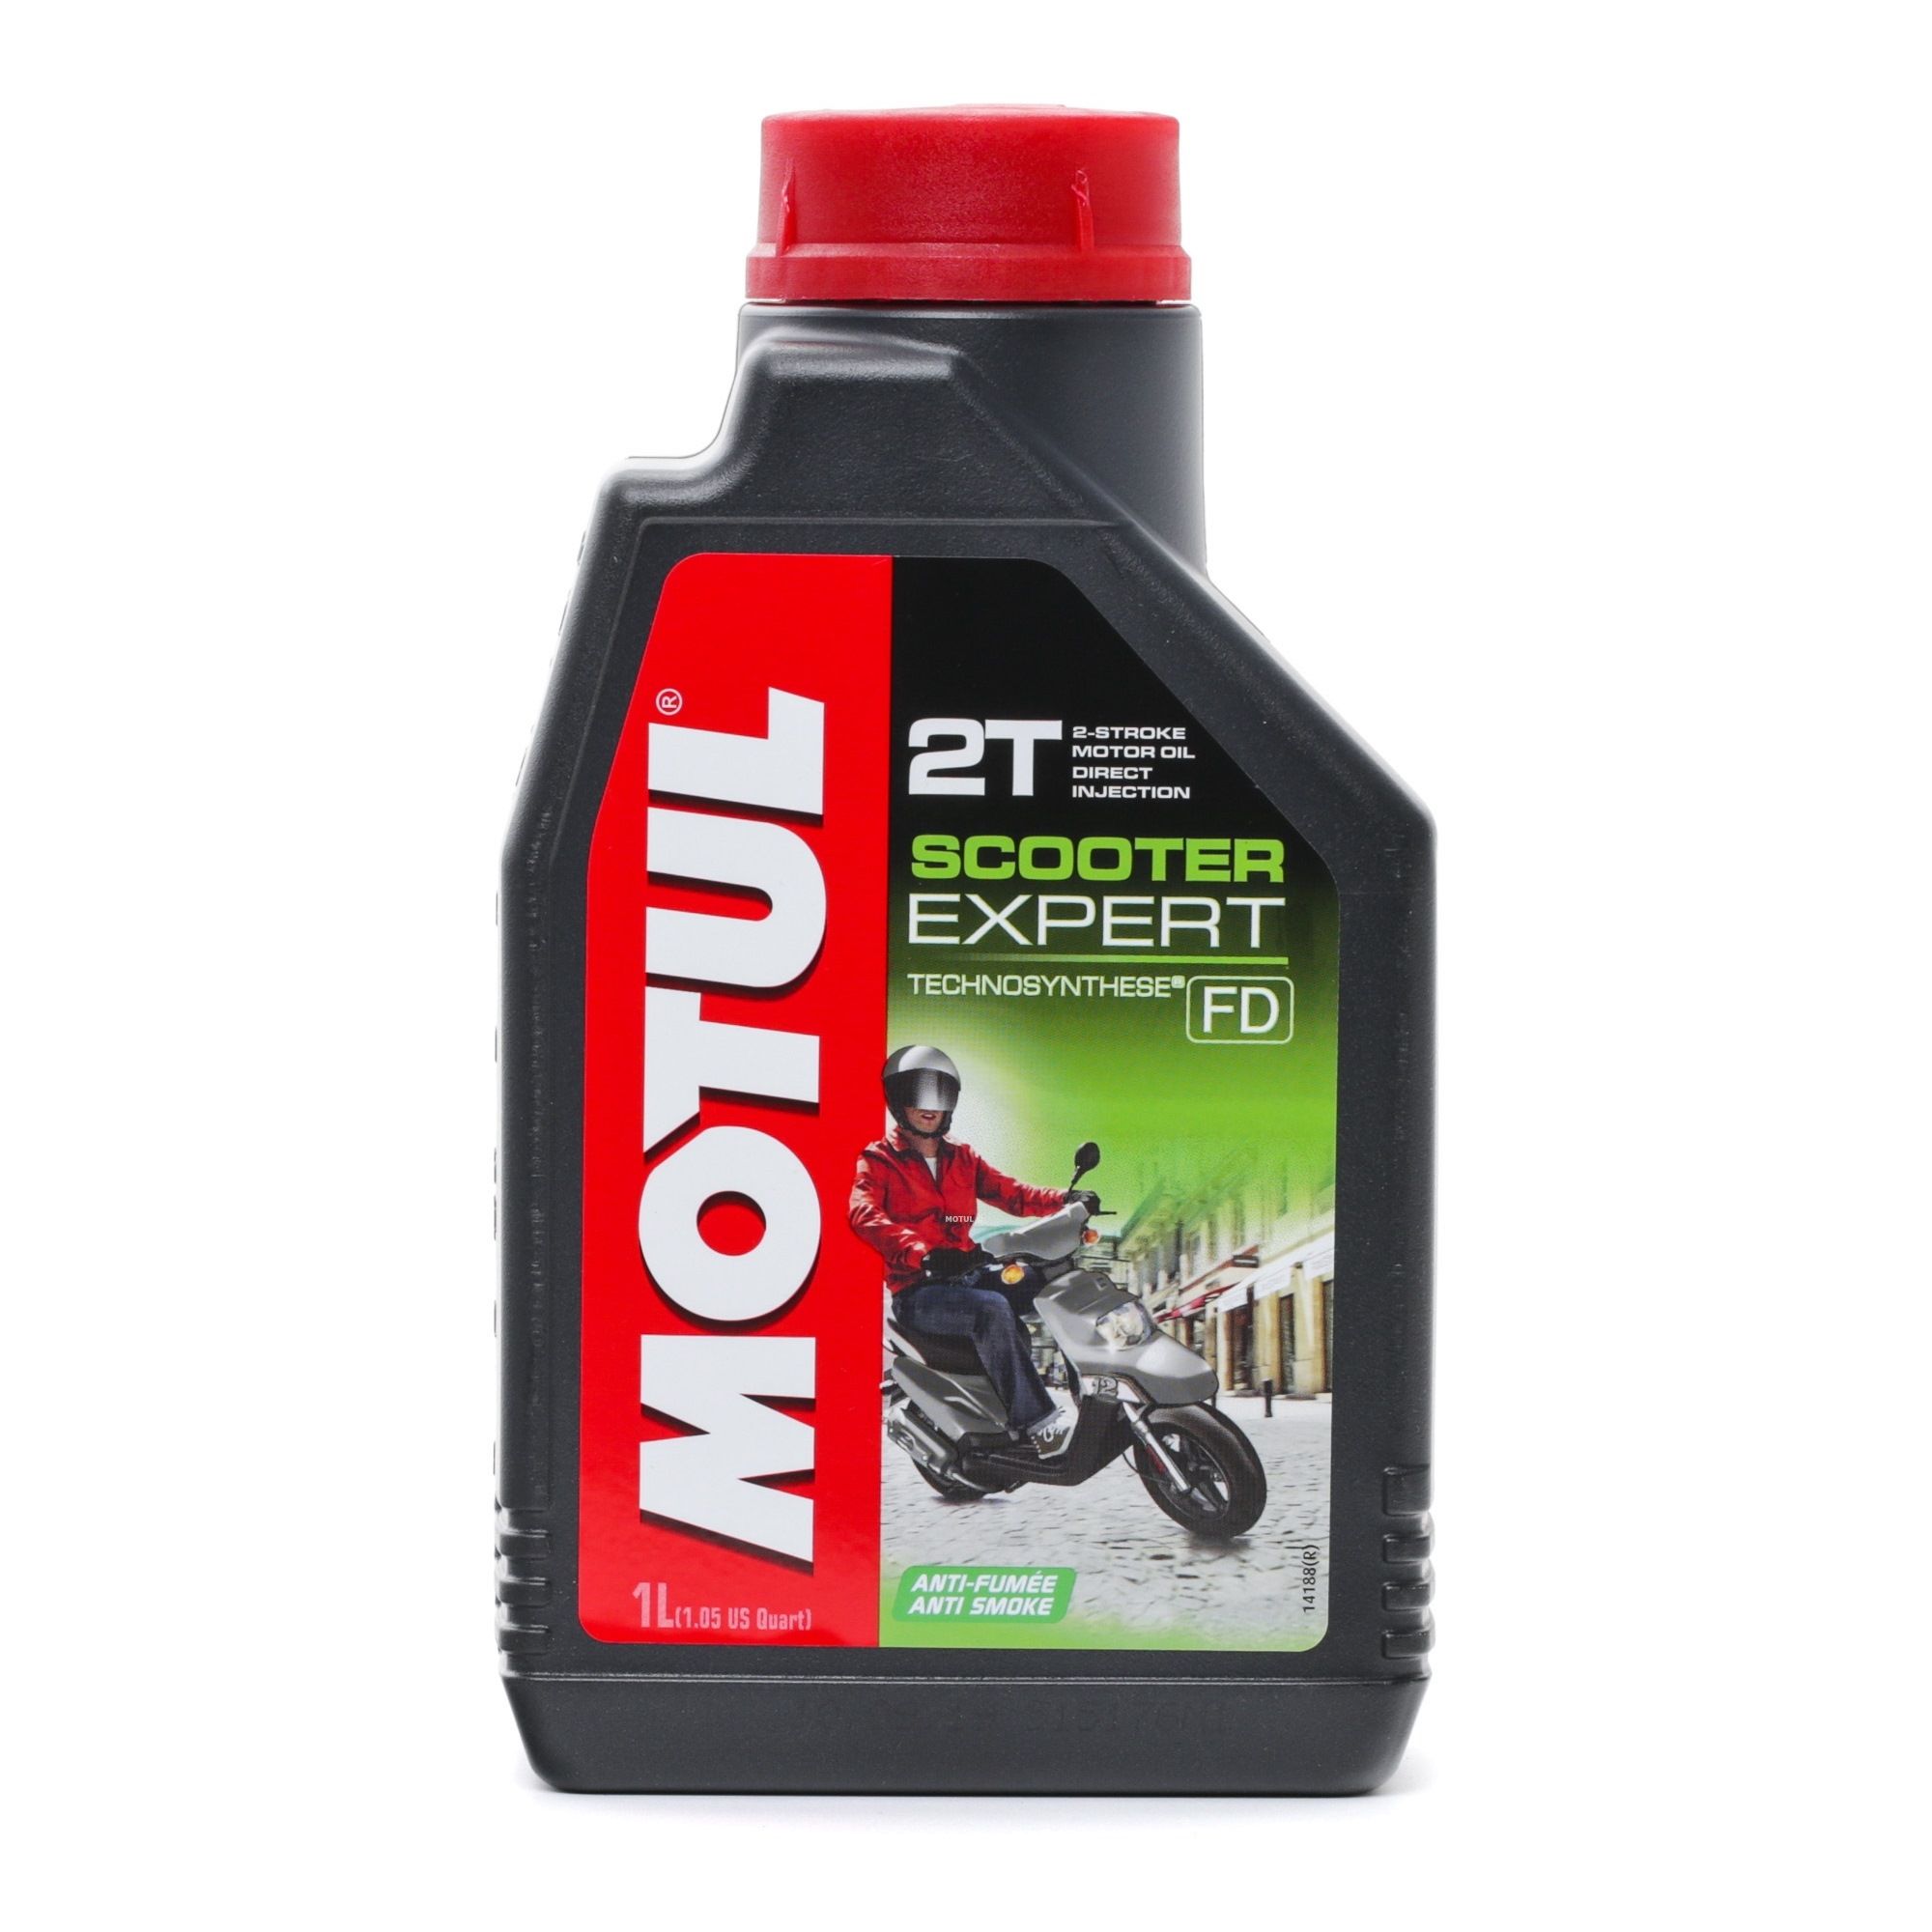 Maxi scooters Moped bike Motorcycle Engine Oil 105880